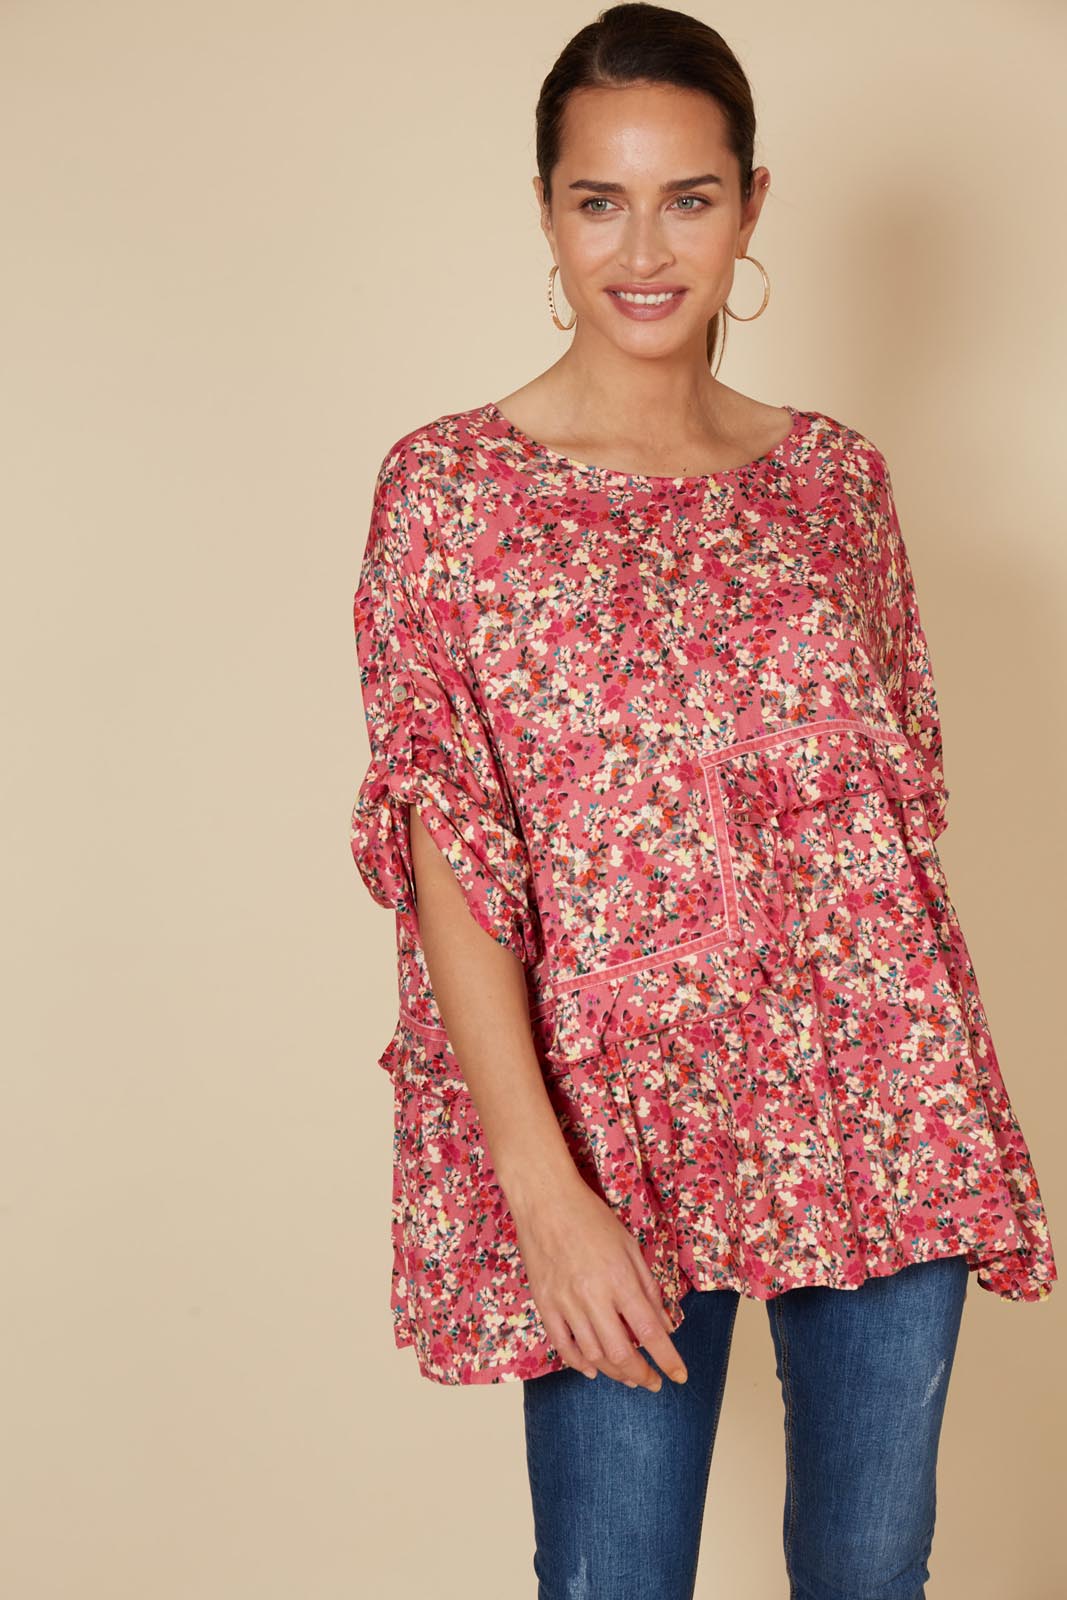 Milli Ruffle Top - Rose Ditsy - eb&ive Clothing - Top 3/4 Sleeve